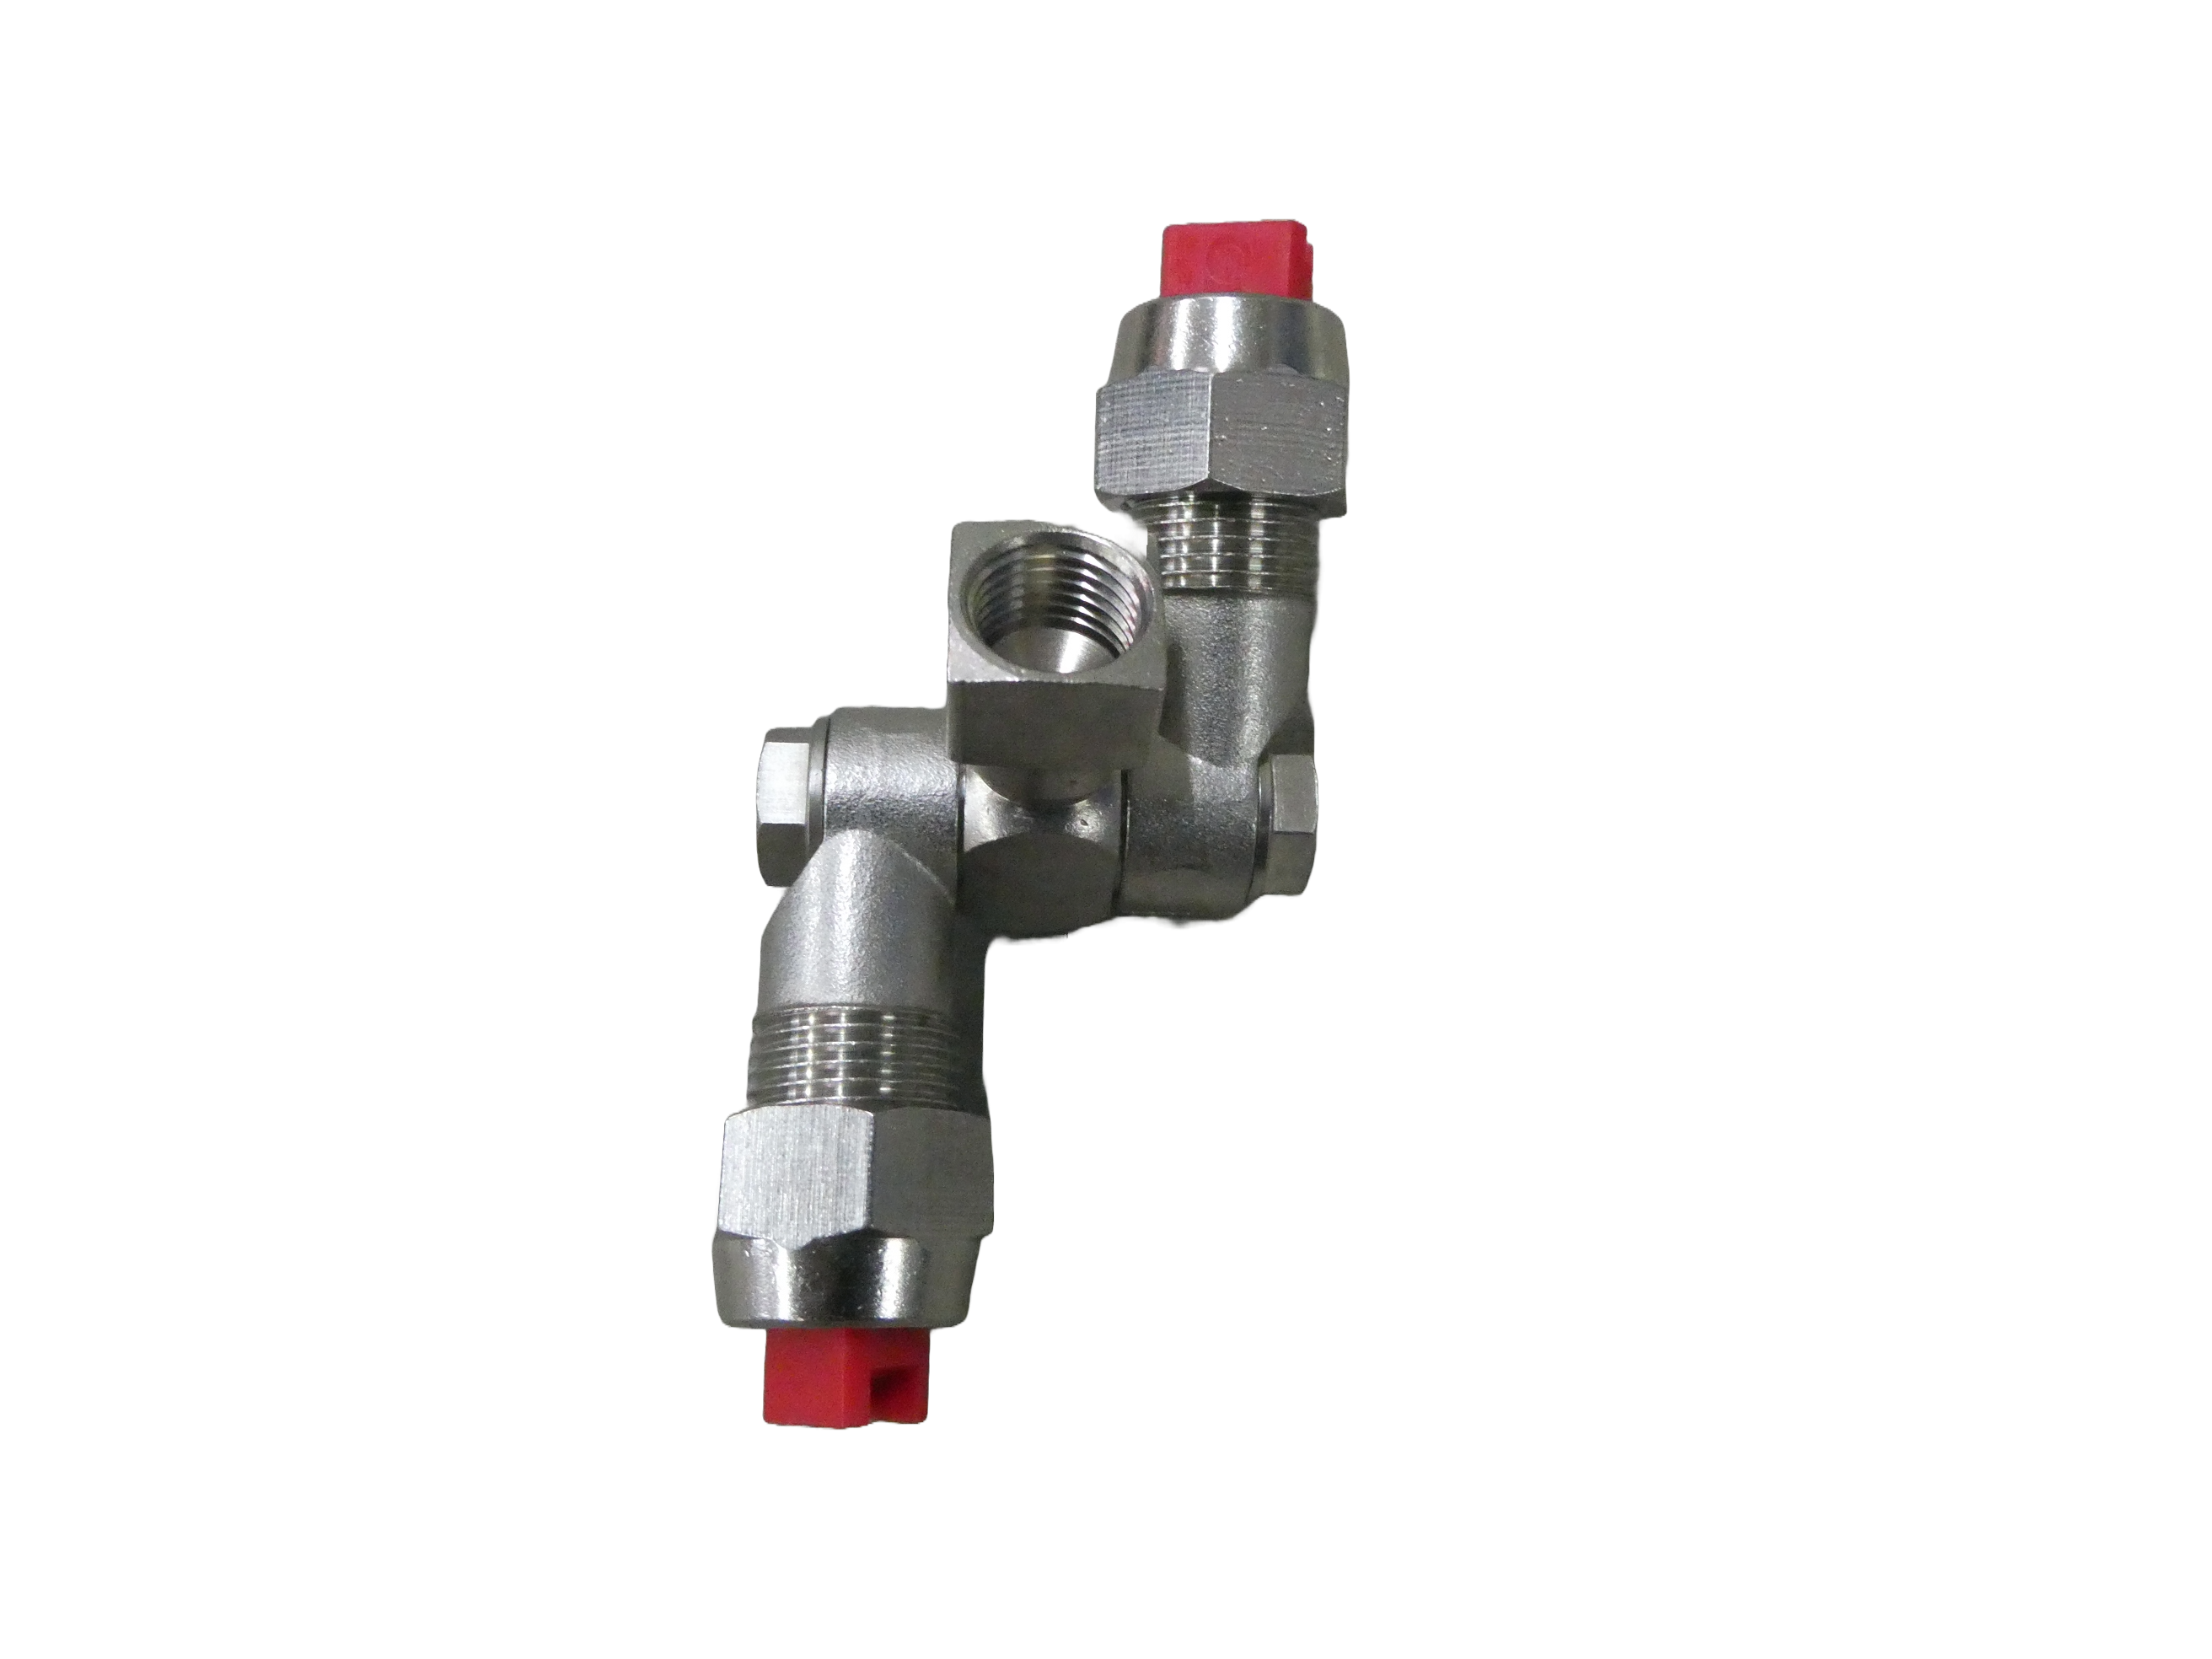 360 Degree Stainless Steel Double Nozzle - 1/4 Female Connection